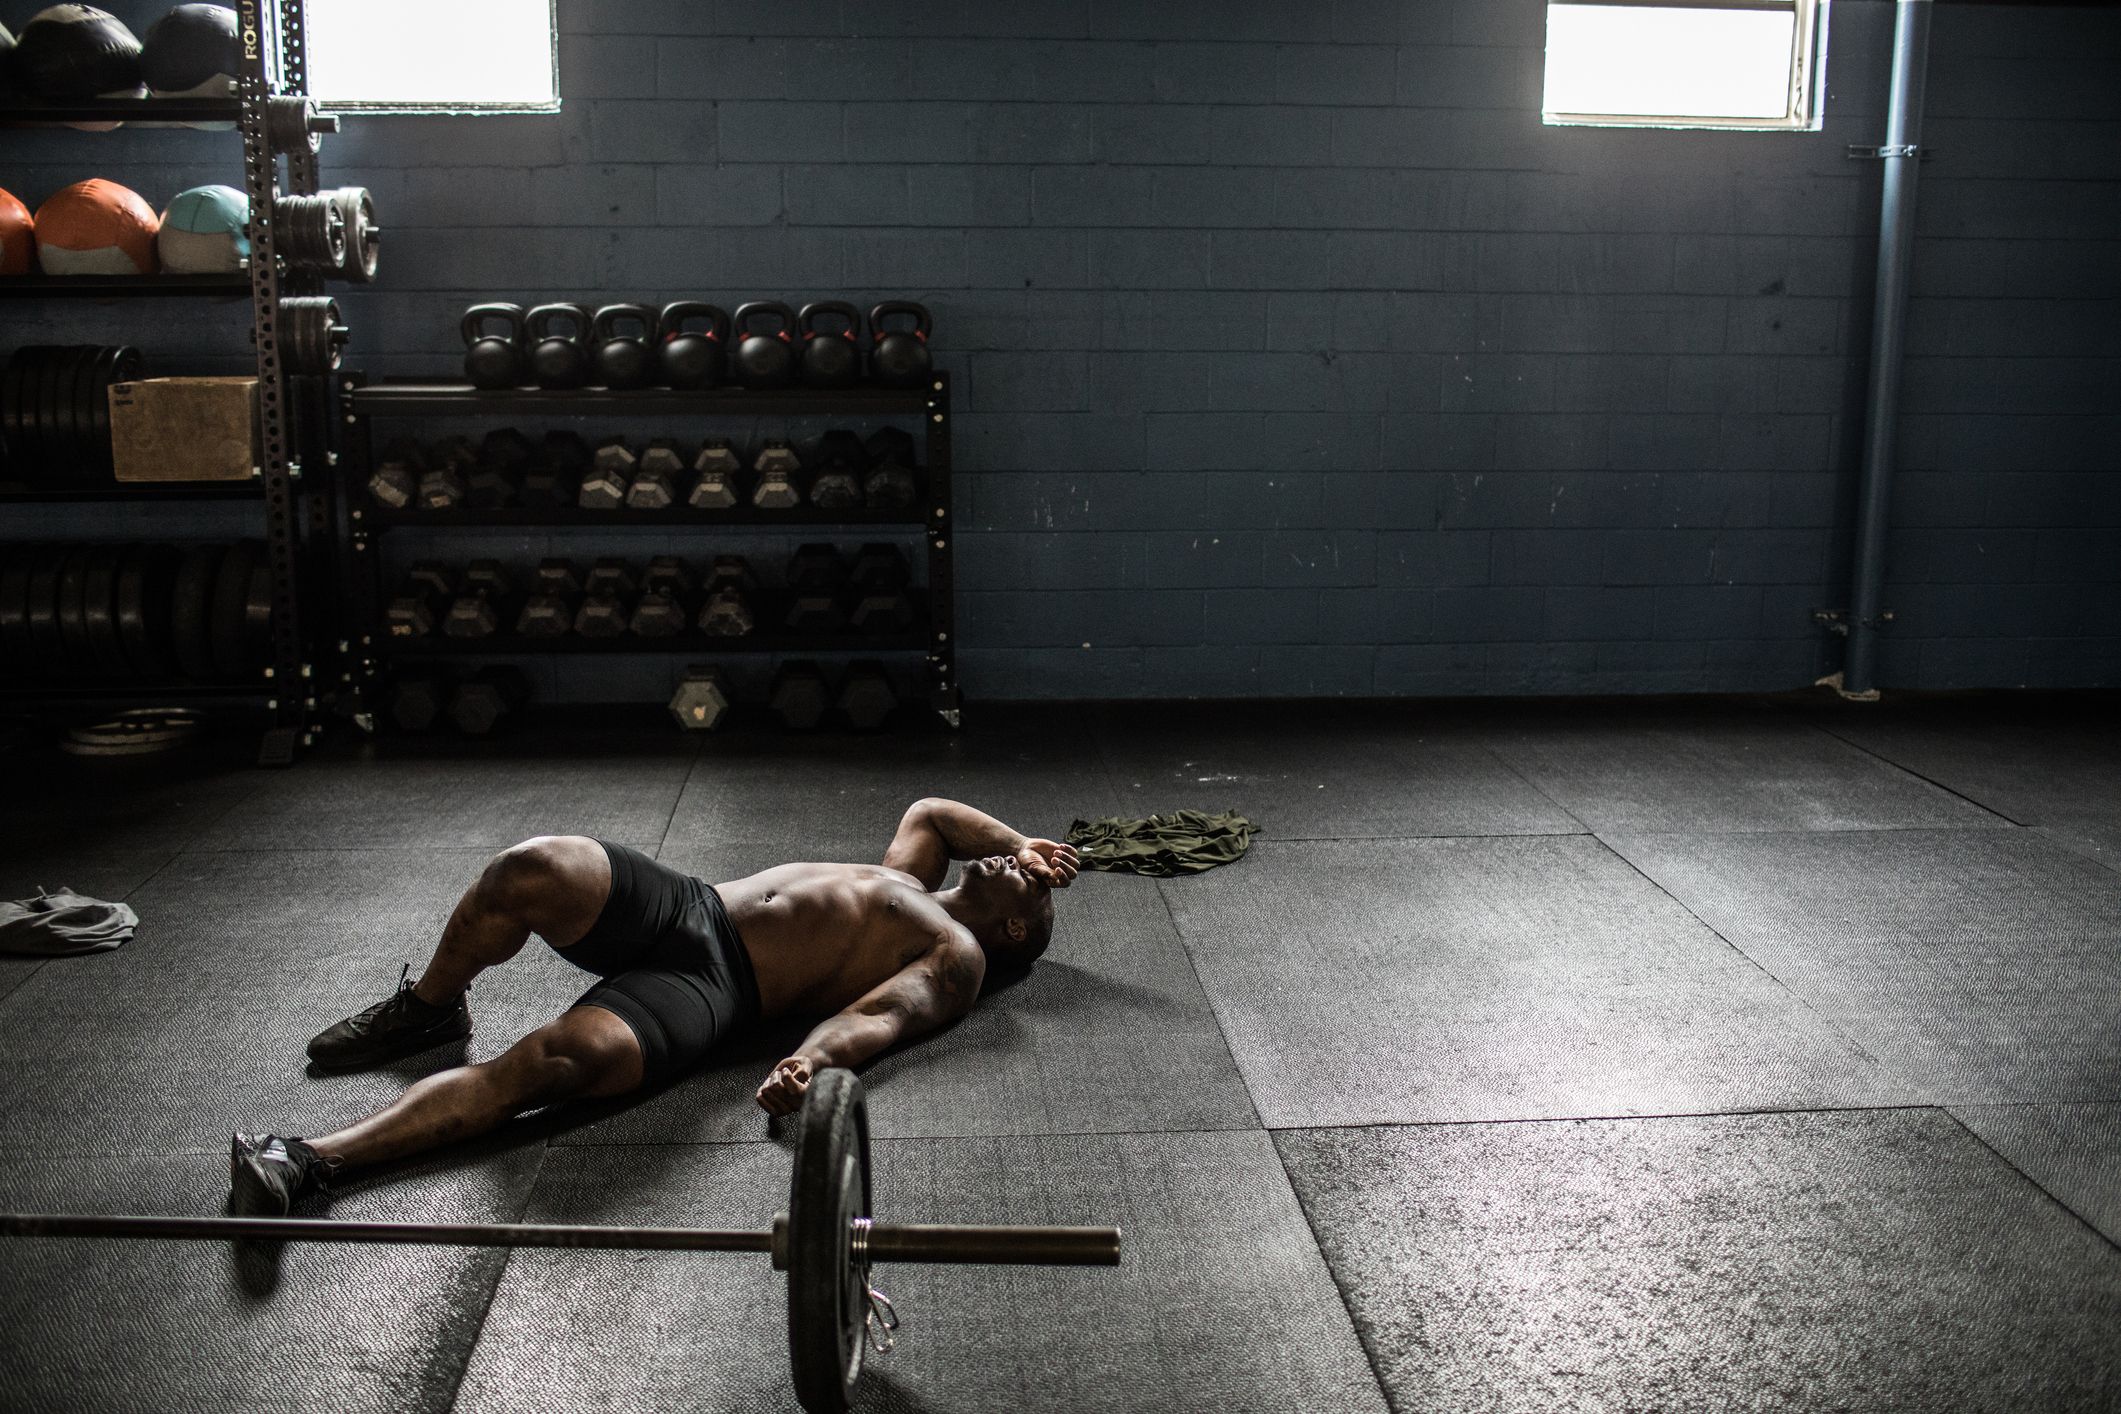 3 Tips To Maximize Your Burpee Box Jump Over